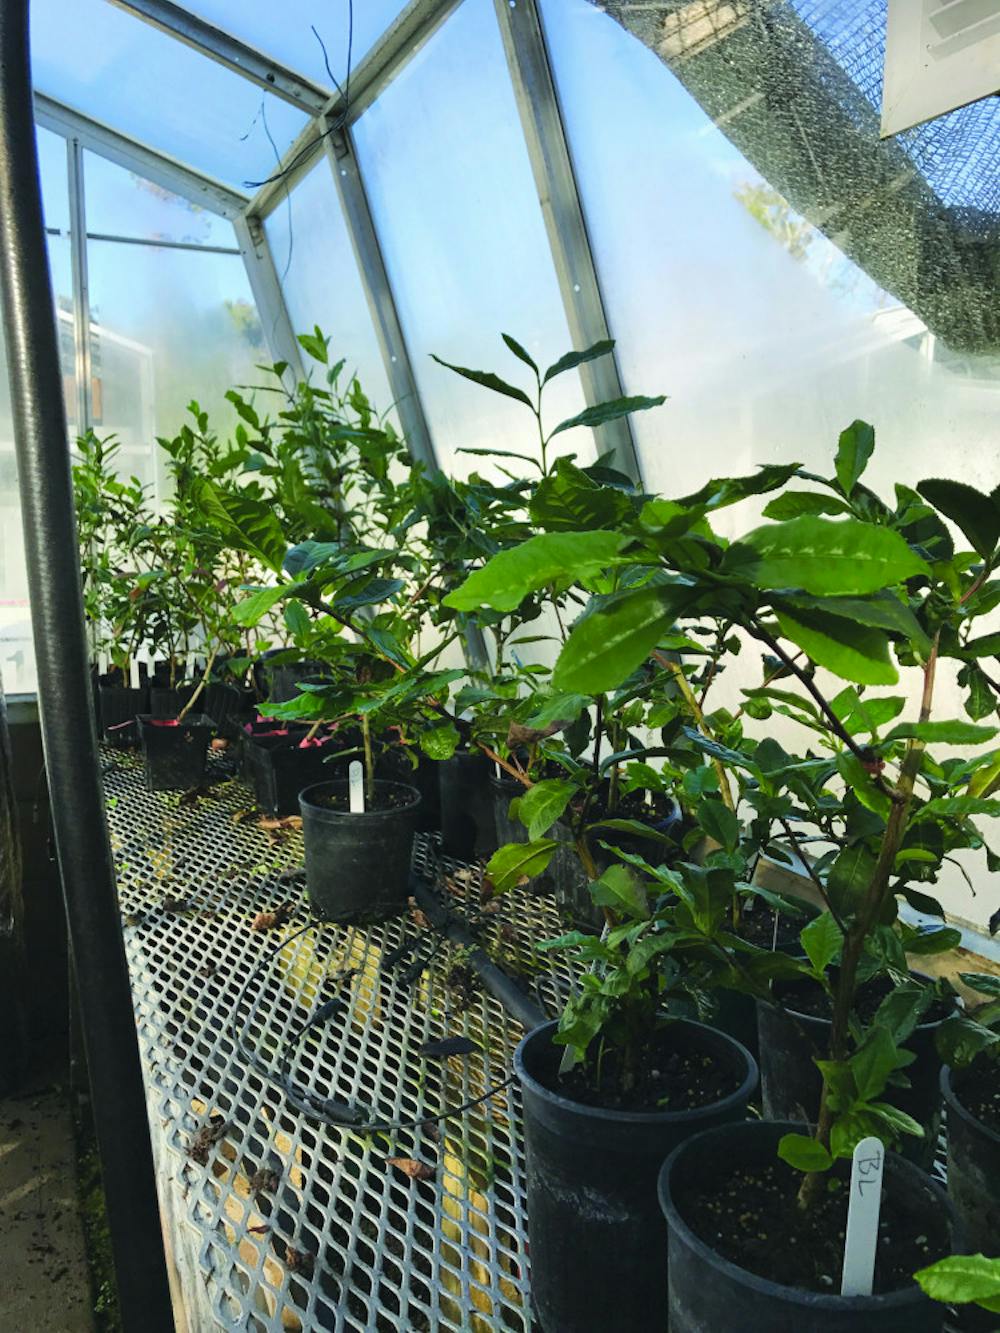 <p><span id="docs-internal-guid-69a6165c-71e3-429f-8479-a0625367cc5d"><span>Researchers are growing potted camellias to determine if tea could be used as an alternative to Florida's citrus crop.</span></span></p>